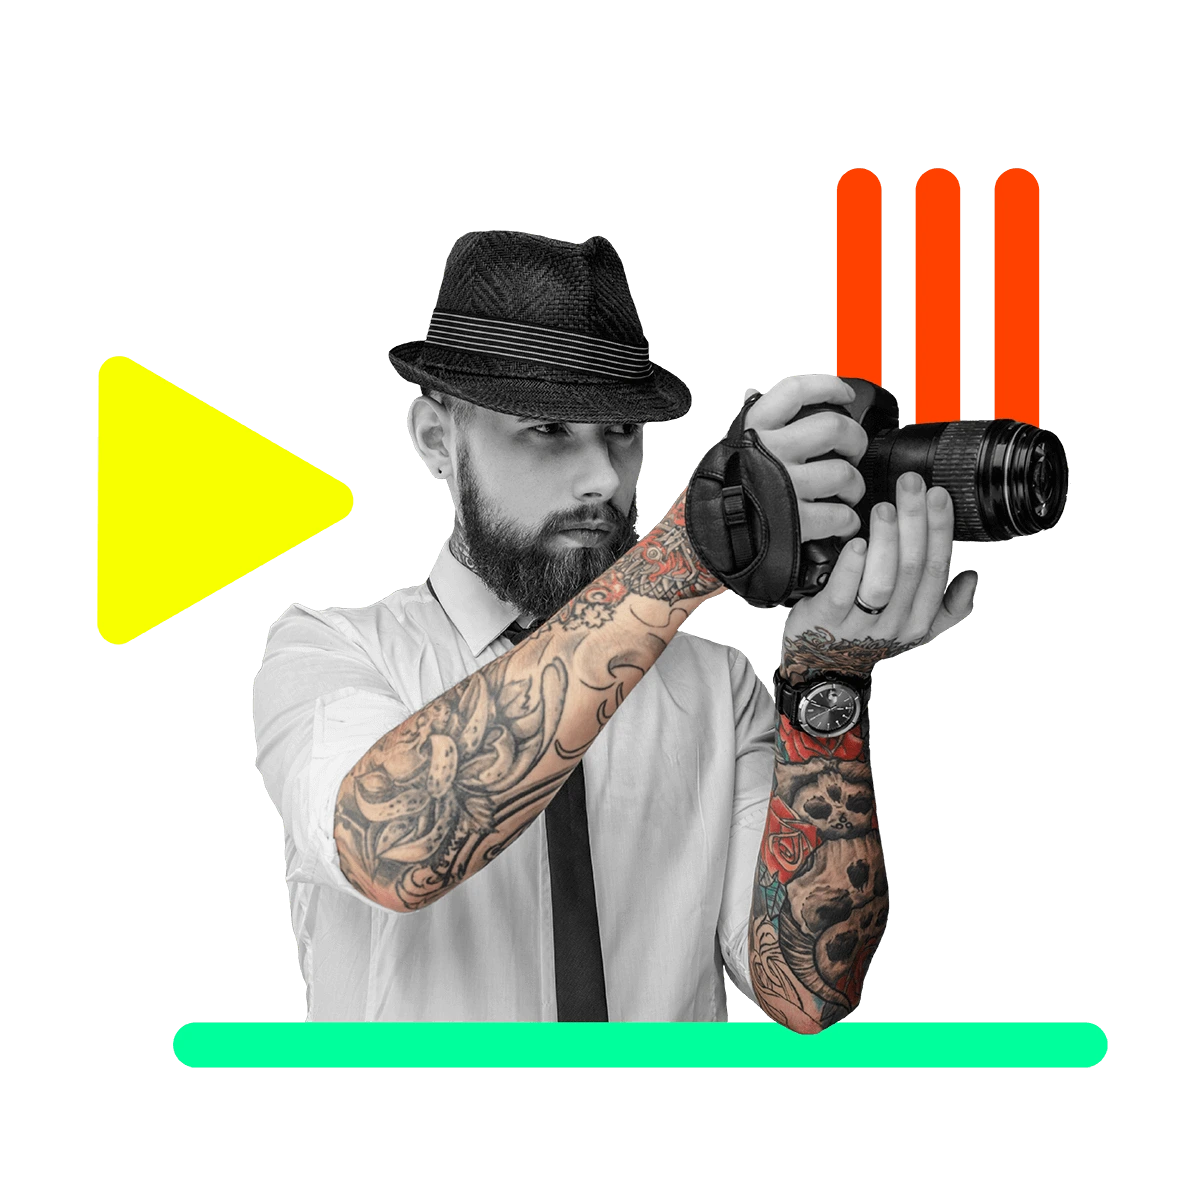 Tattooed man in a hat holding up a camera by colorful shapes